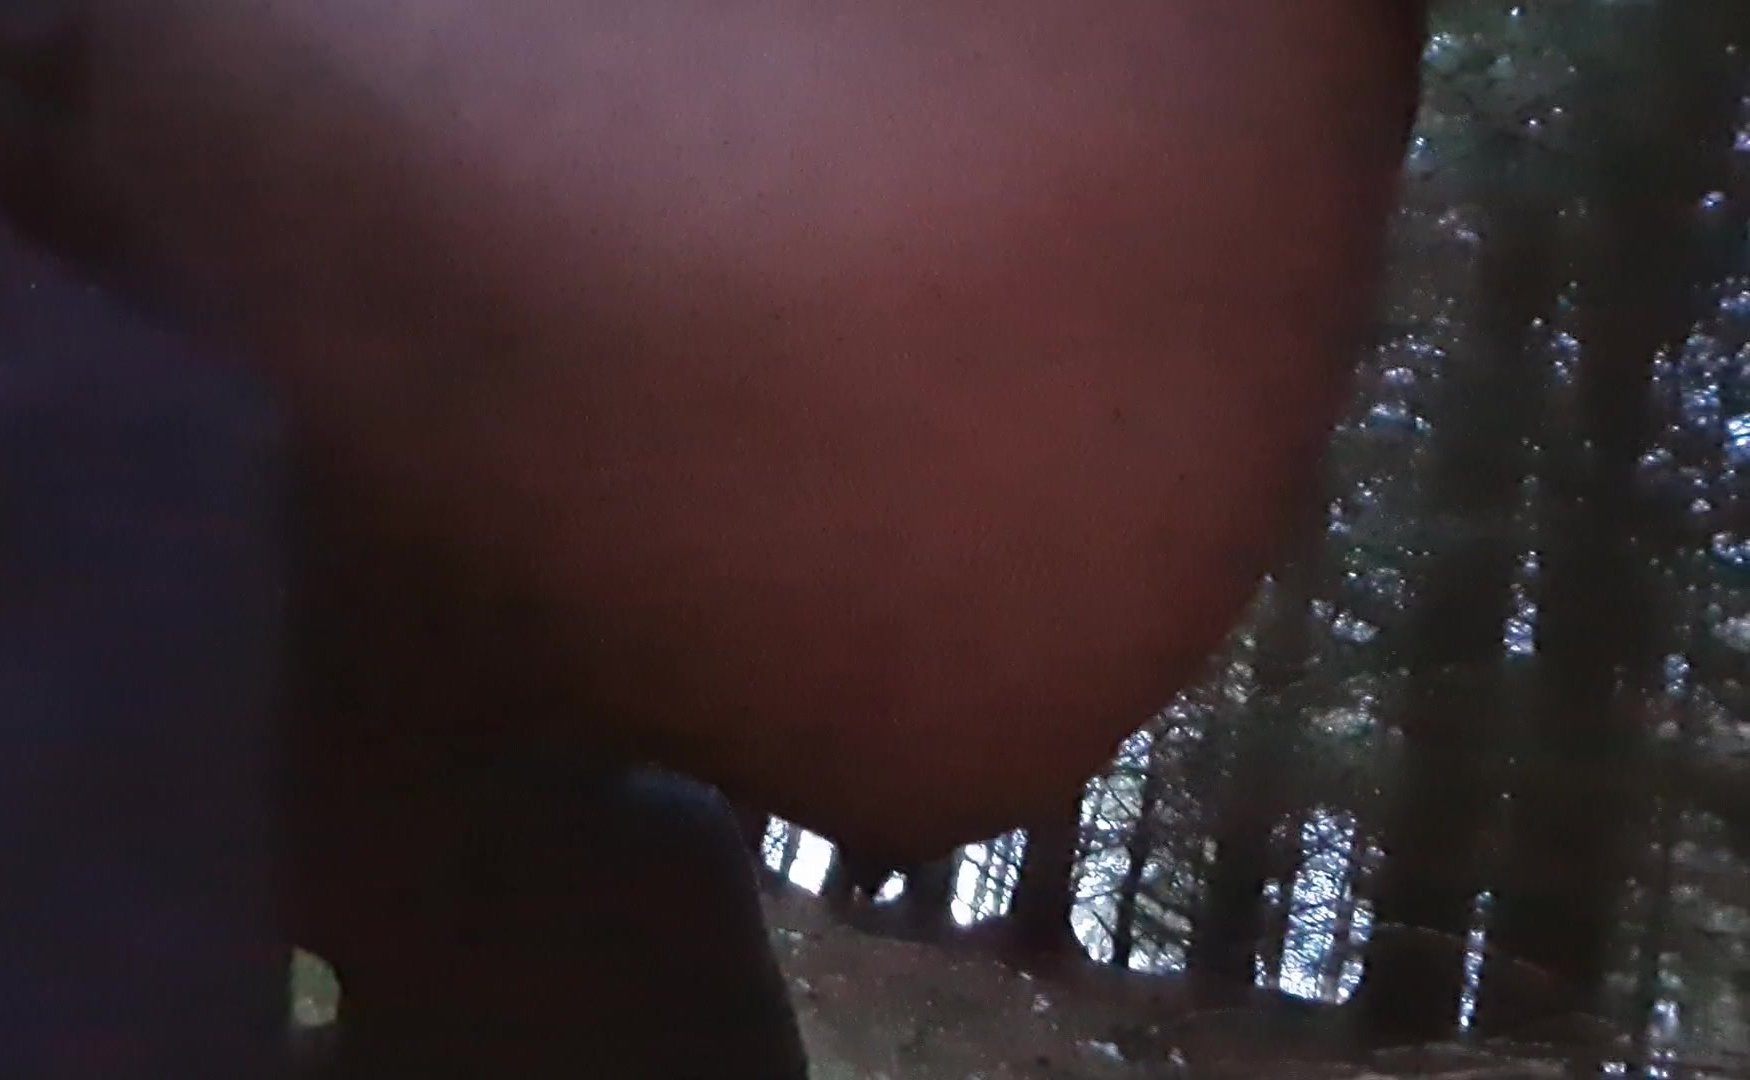 Shit in the woods - video 7